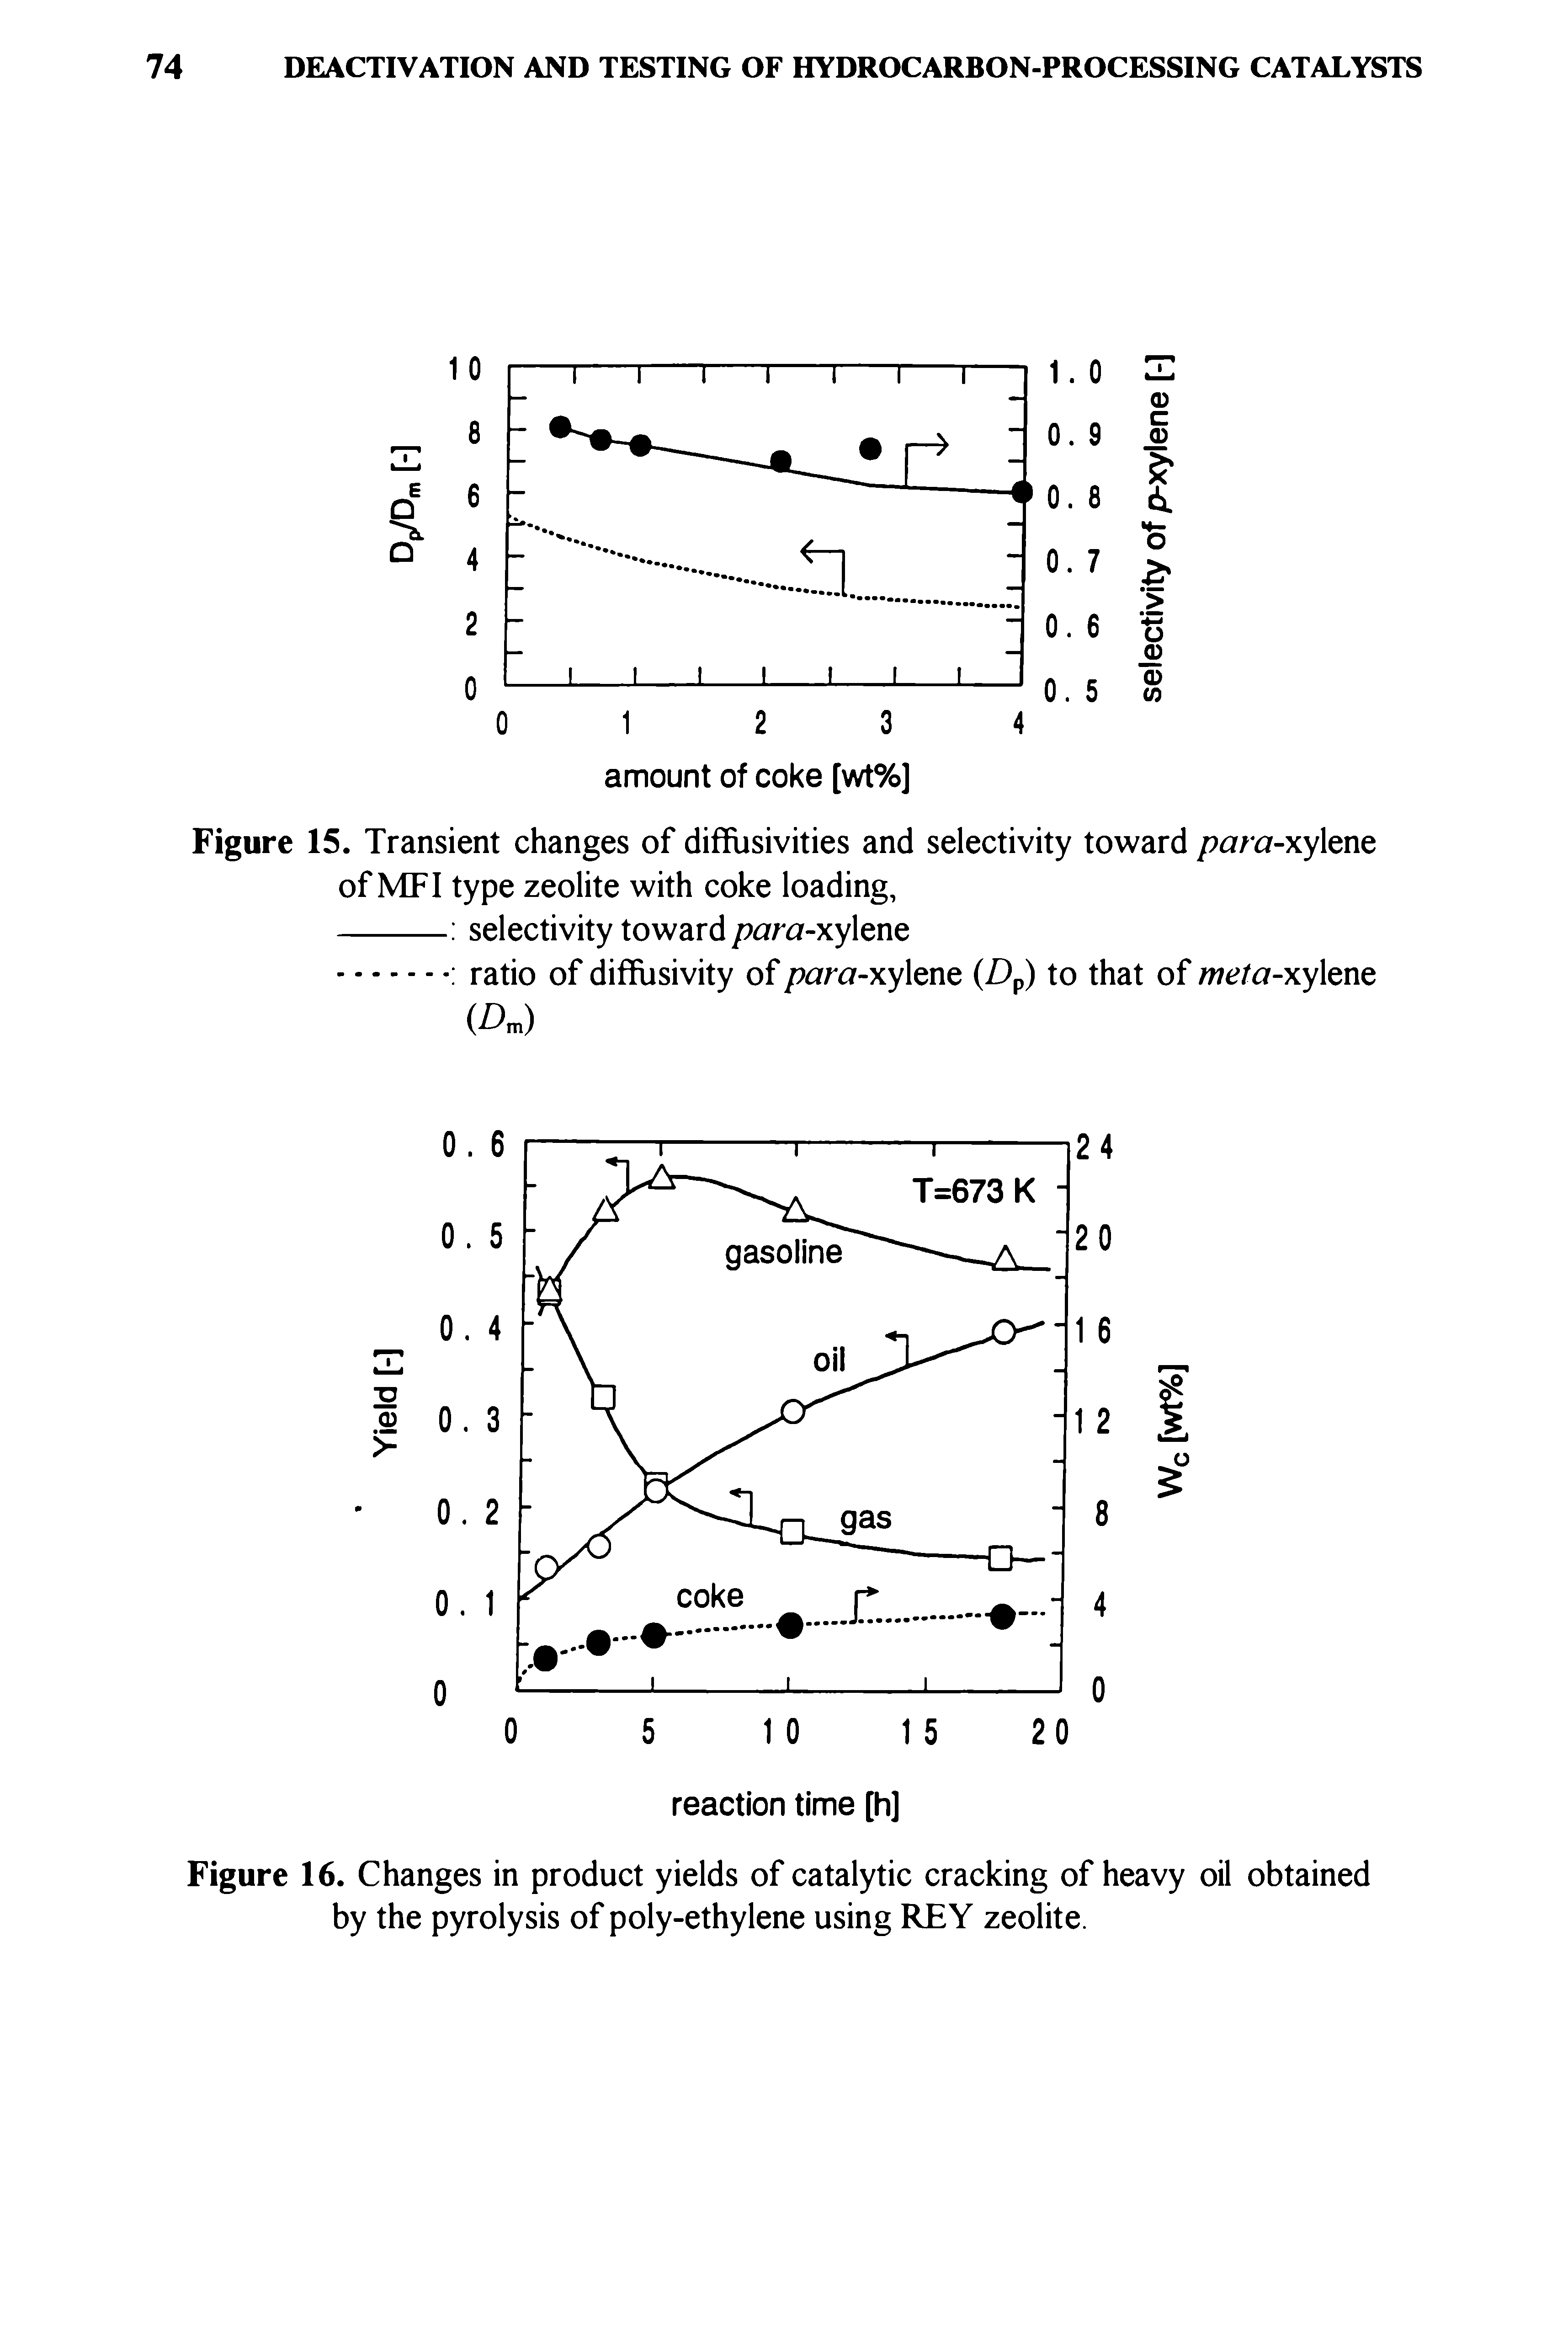 Figure 16. Changes in product yields of catalytic cracking of heavy oil obtained by the pyrolysis of poly-ethylene using REY zeolite.